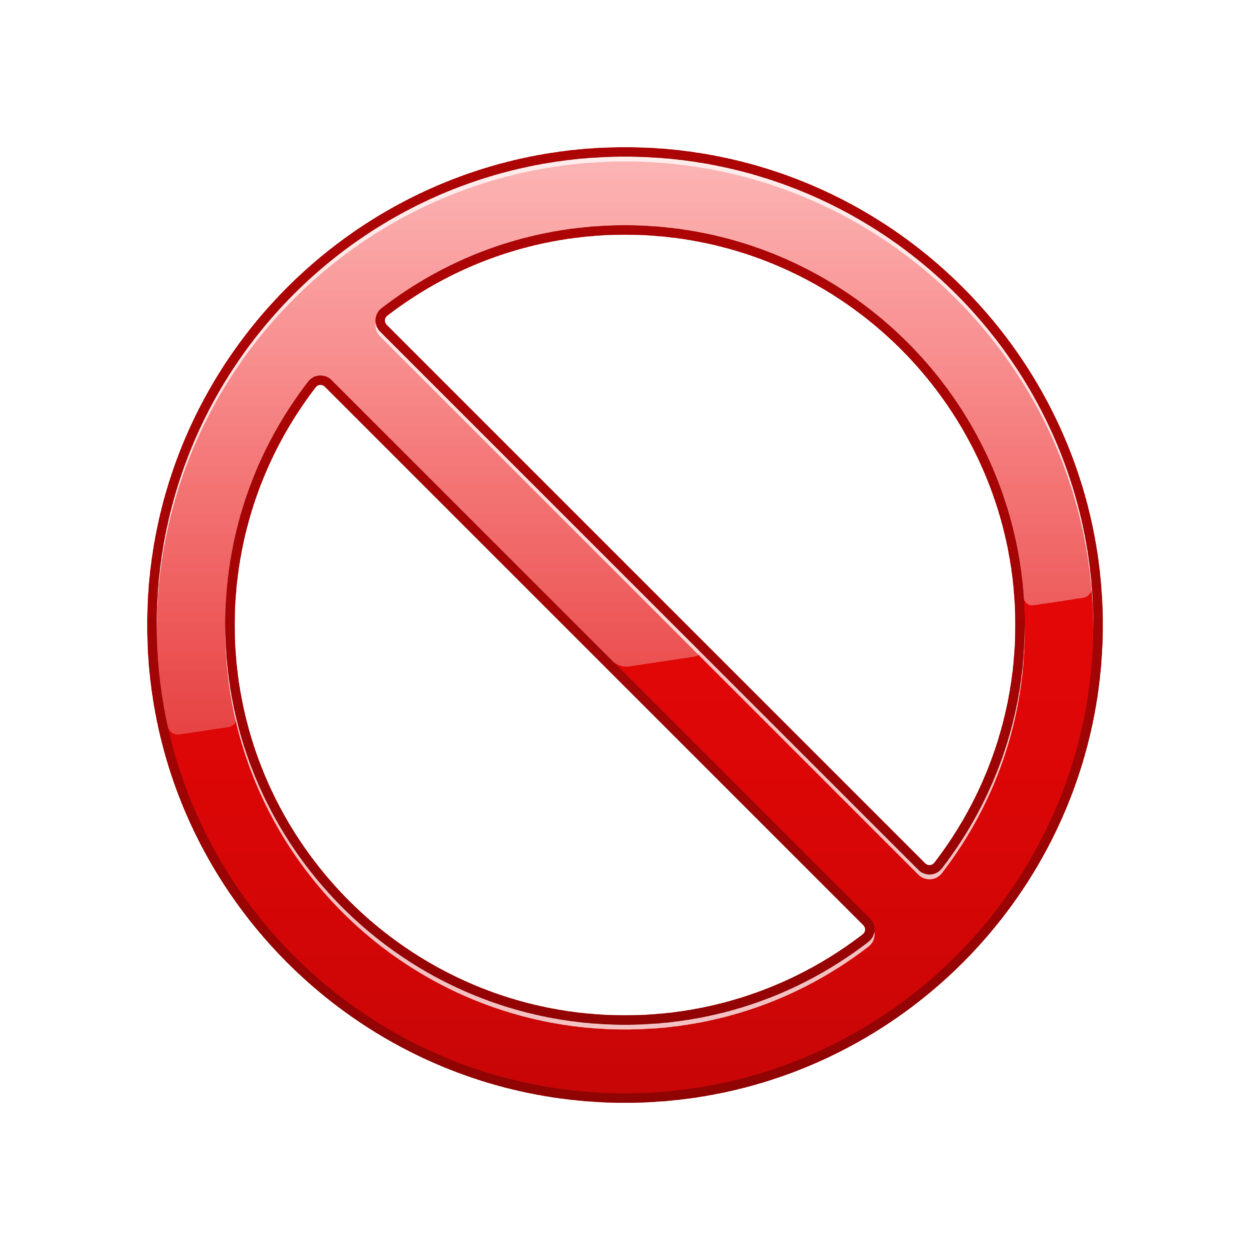 Illustration of no sign or remove